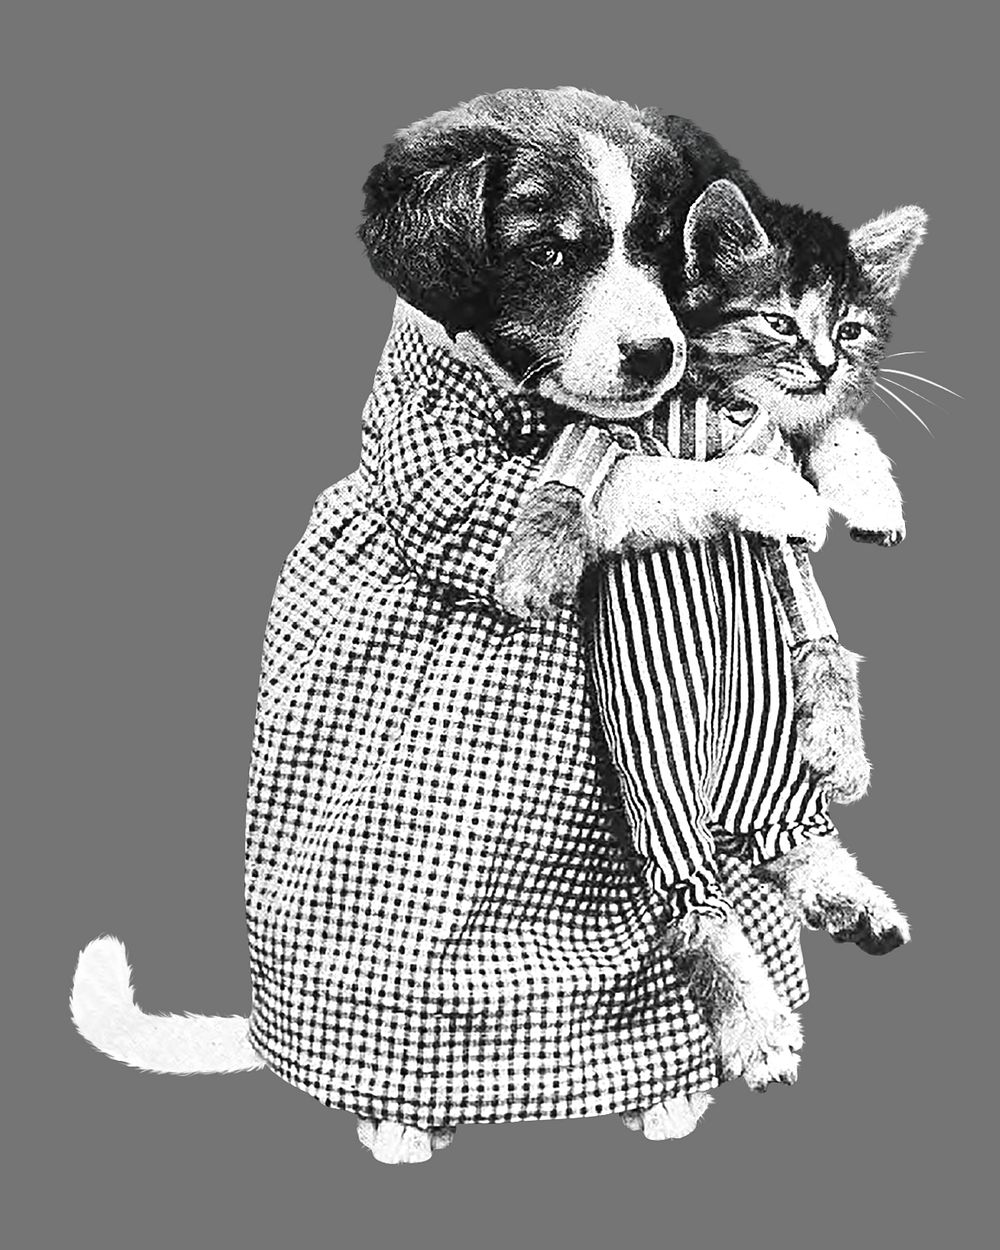 Dog hugging cat vintage illustration psd. Remixed by rawpixel. 